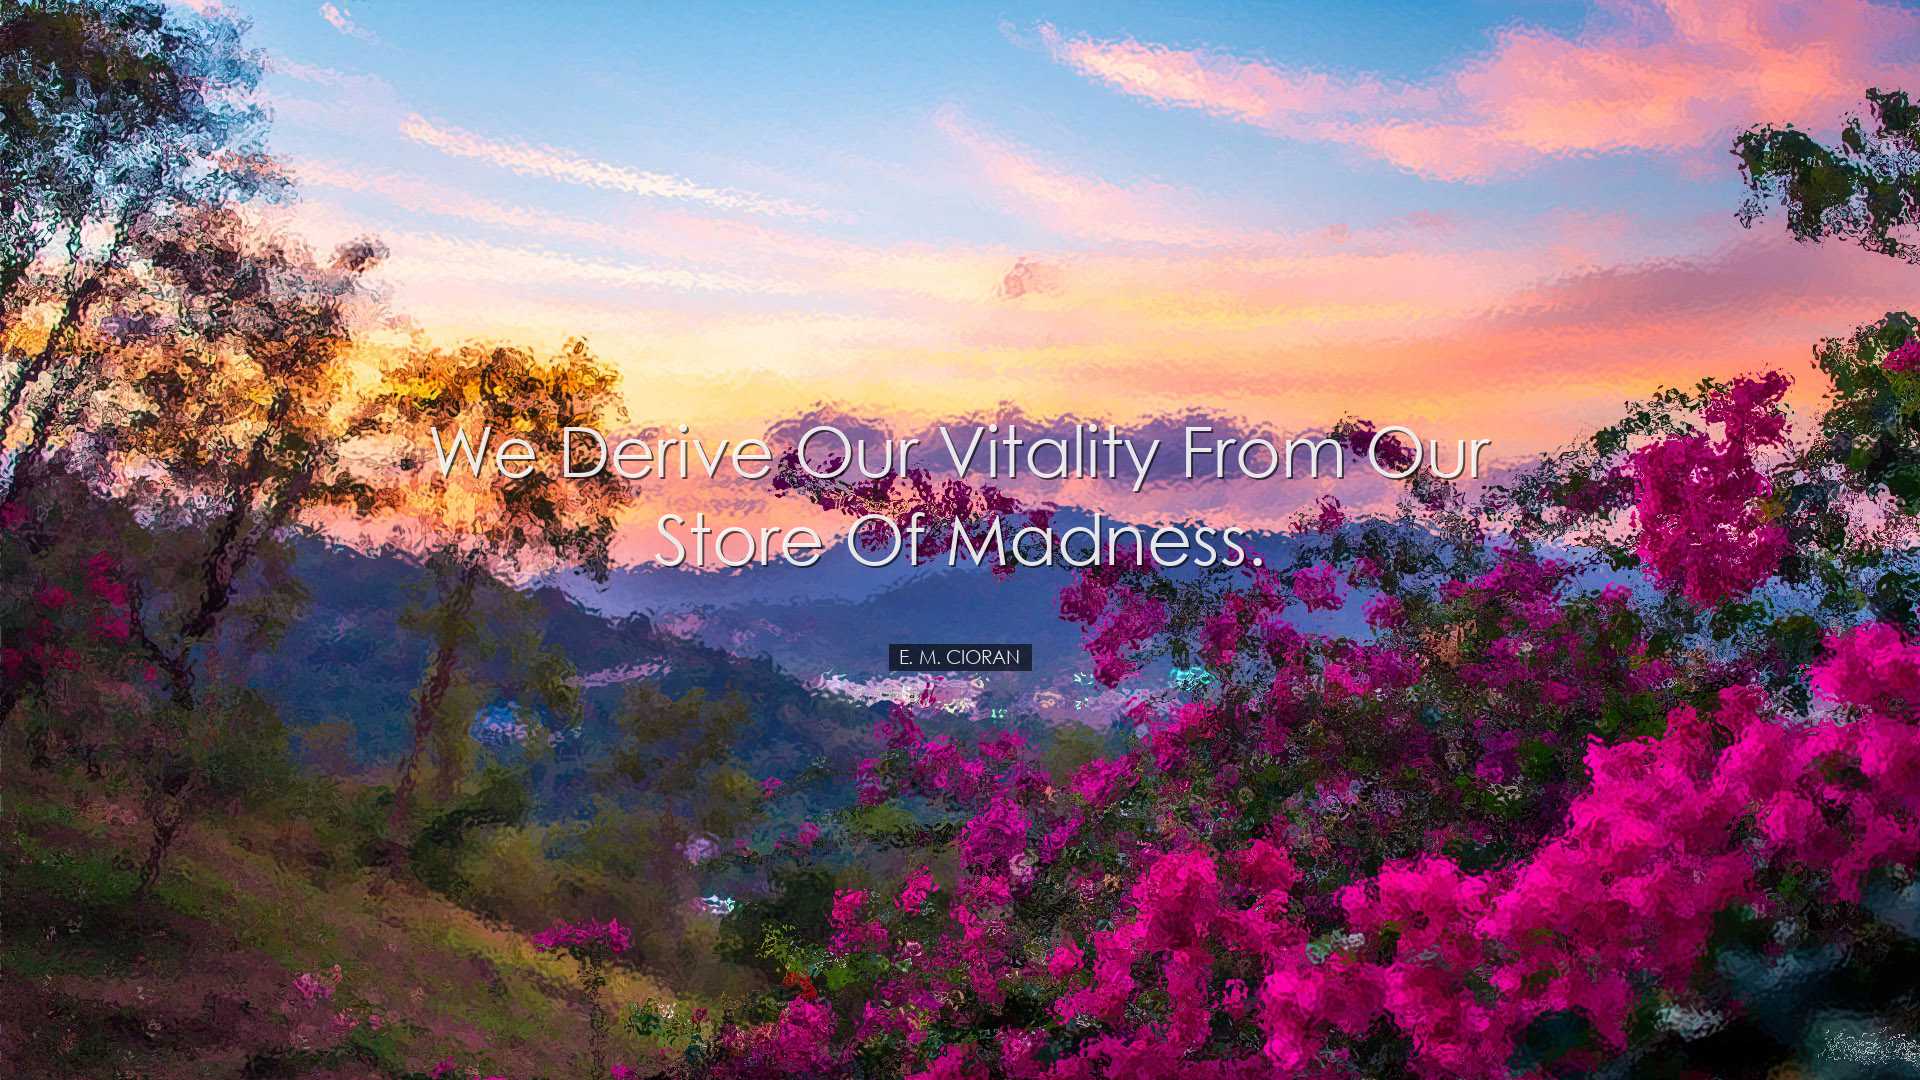 We derive our vitality from our store of madness. - E. M. Cioran